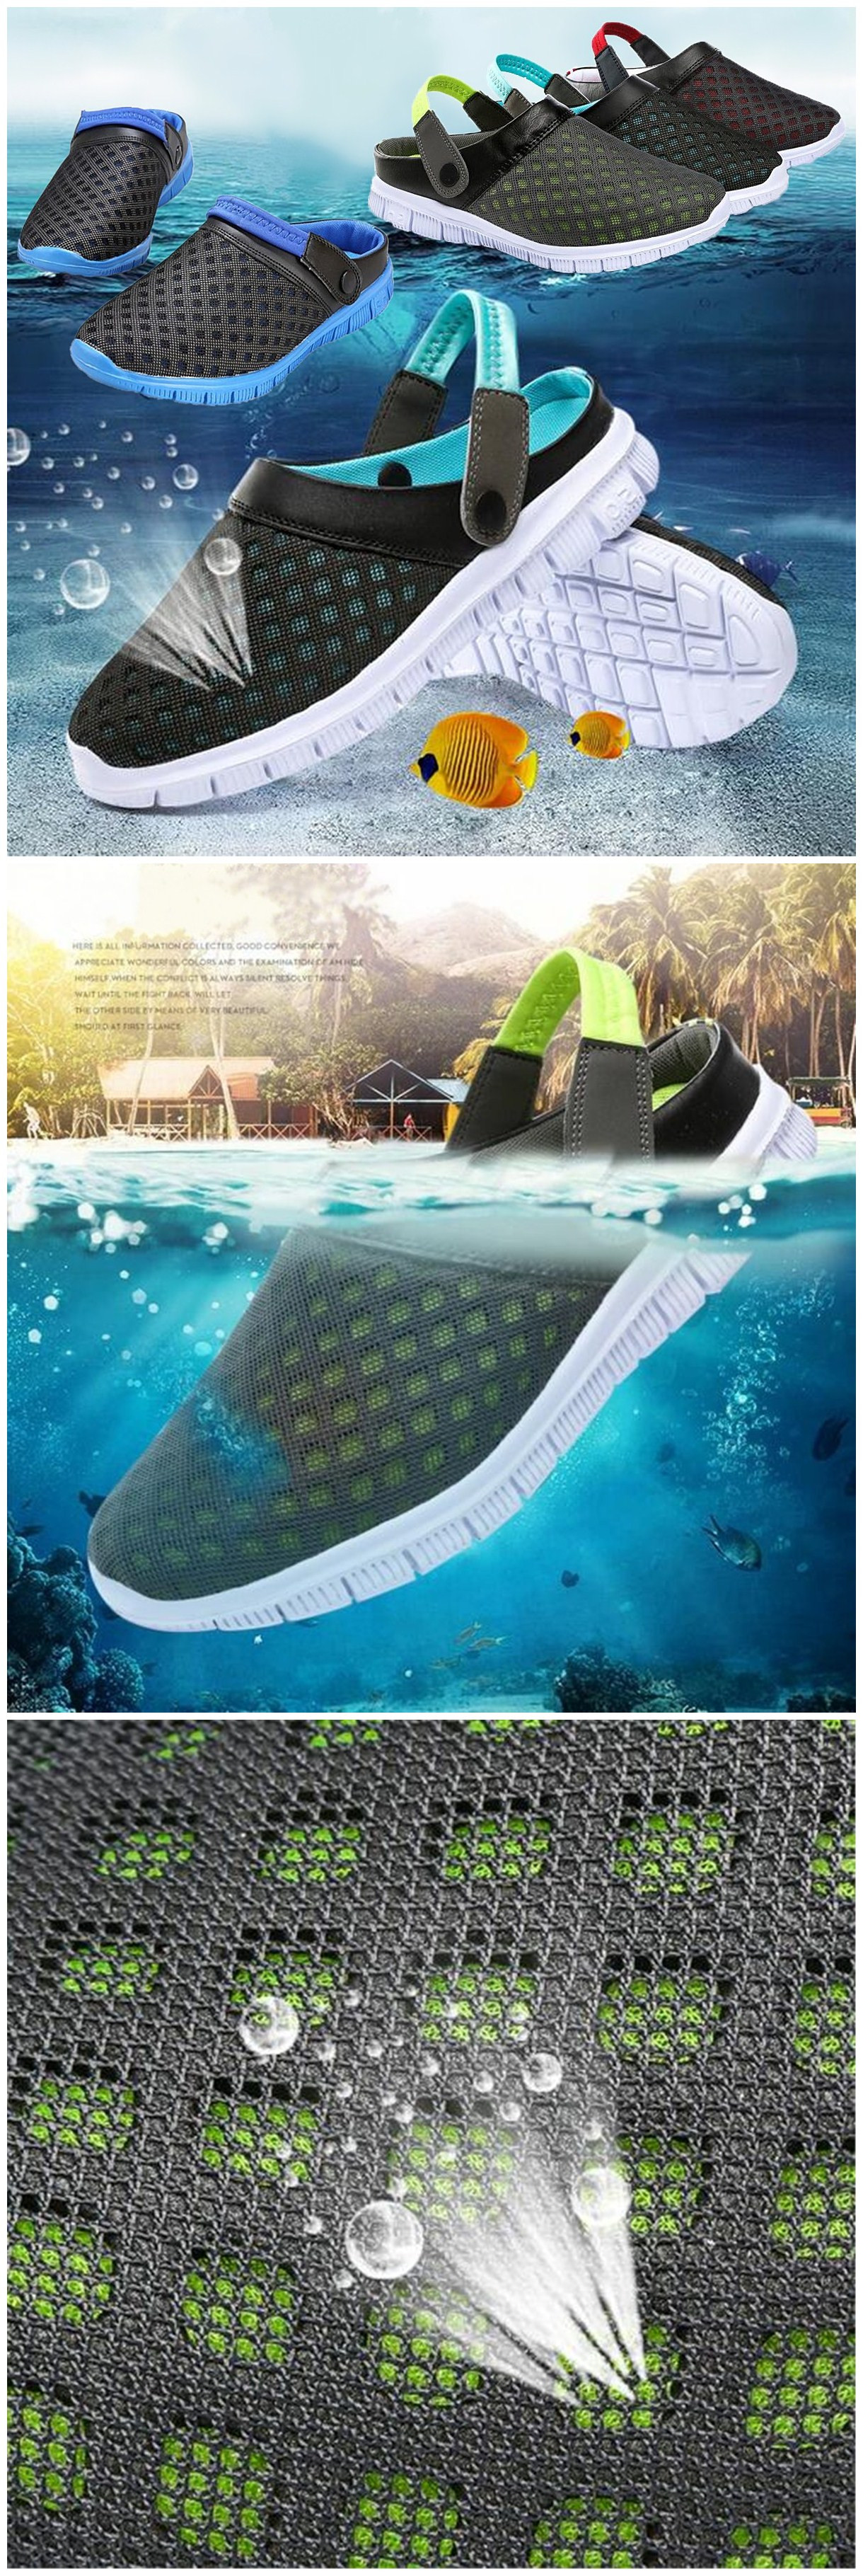 IPReetrade-Plus-Size-Outdoor-Mesh-Slippers-Breathable-Sandals-Summer-Beach-Casual-Lazy-Shoes-1147137